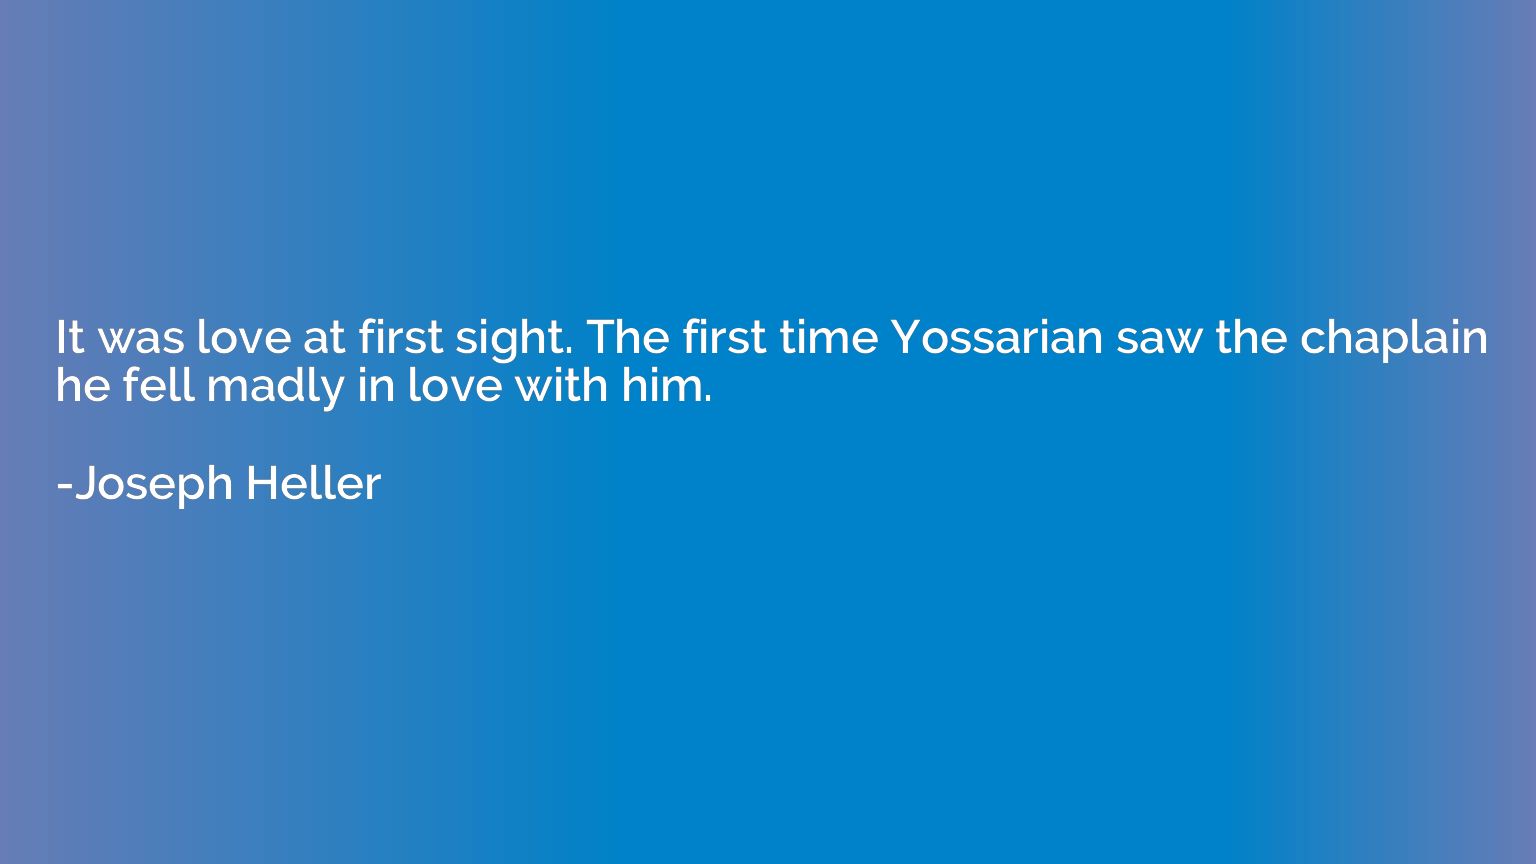 It was love at first sight. The first time Yossarian saw the